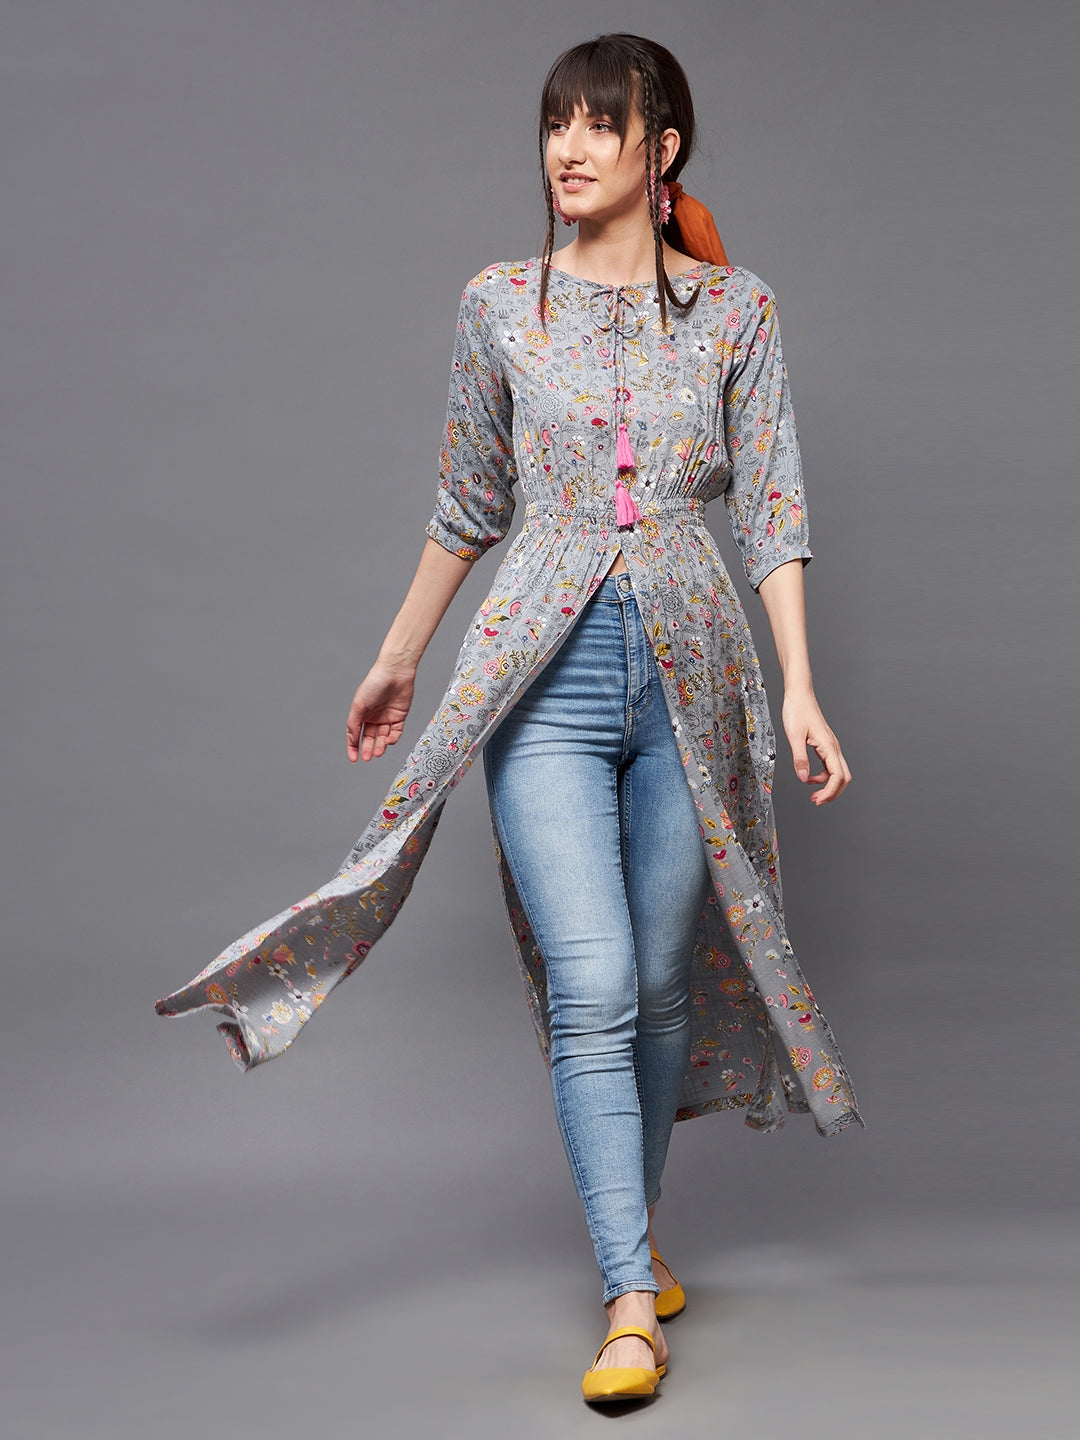 Multicolored-Base-Grey Round neck 3/4th Sleeve Floral Elasticated Maxi Top